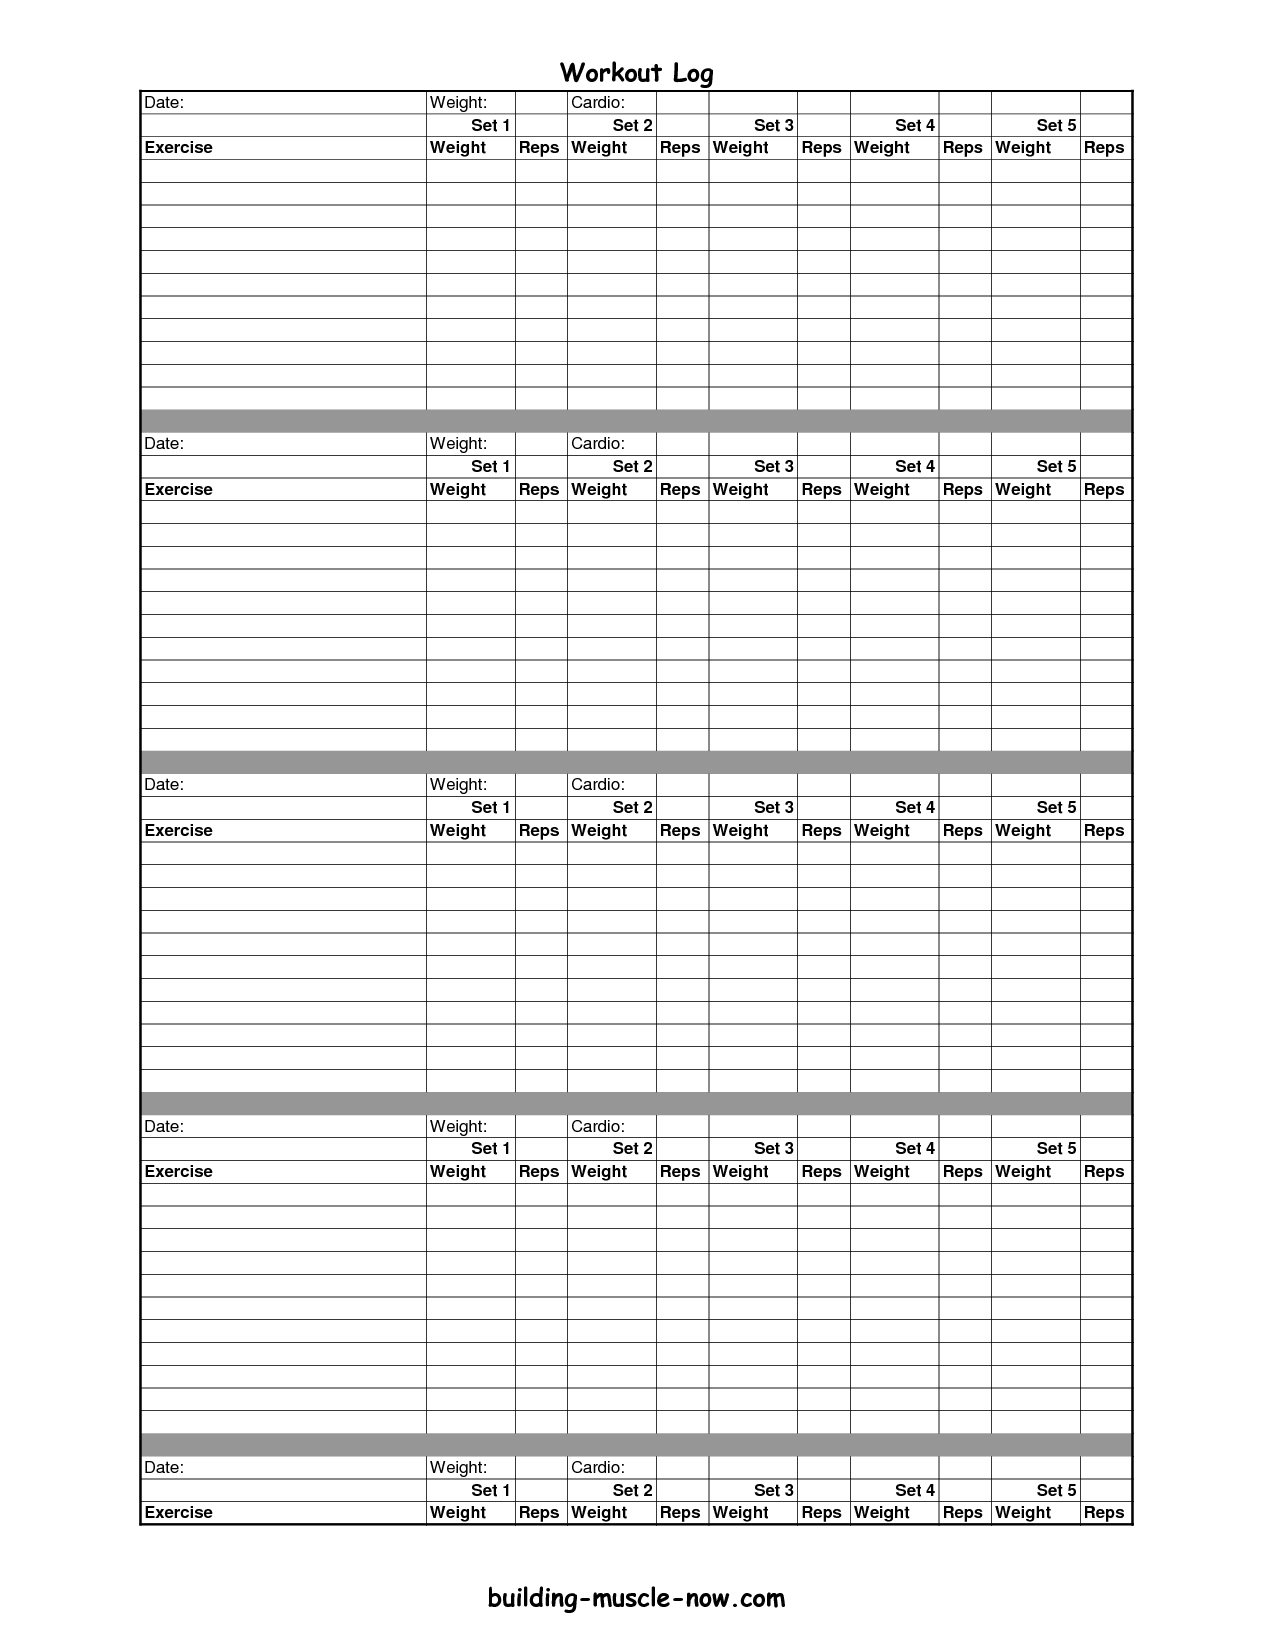 Fitness Journal Printable - Google Search (Fitness Routine Workout - Free Printable Workout Log